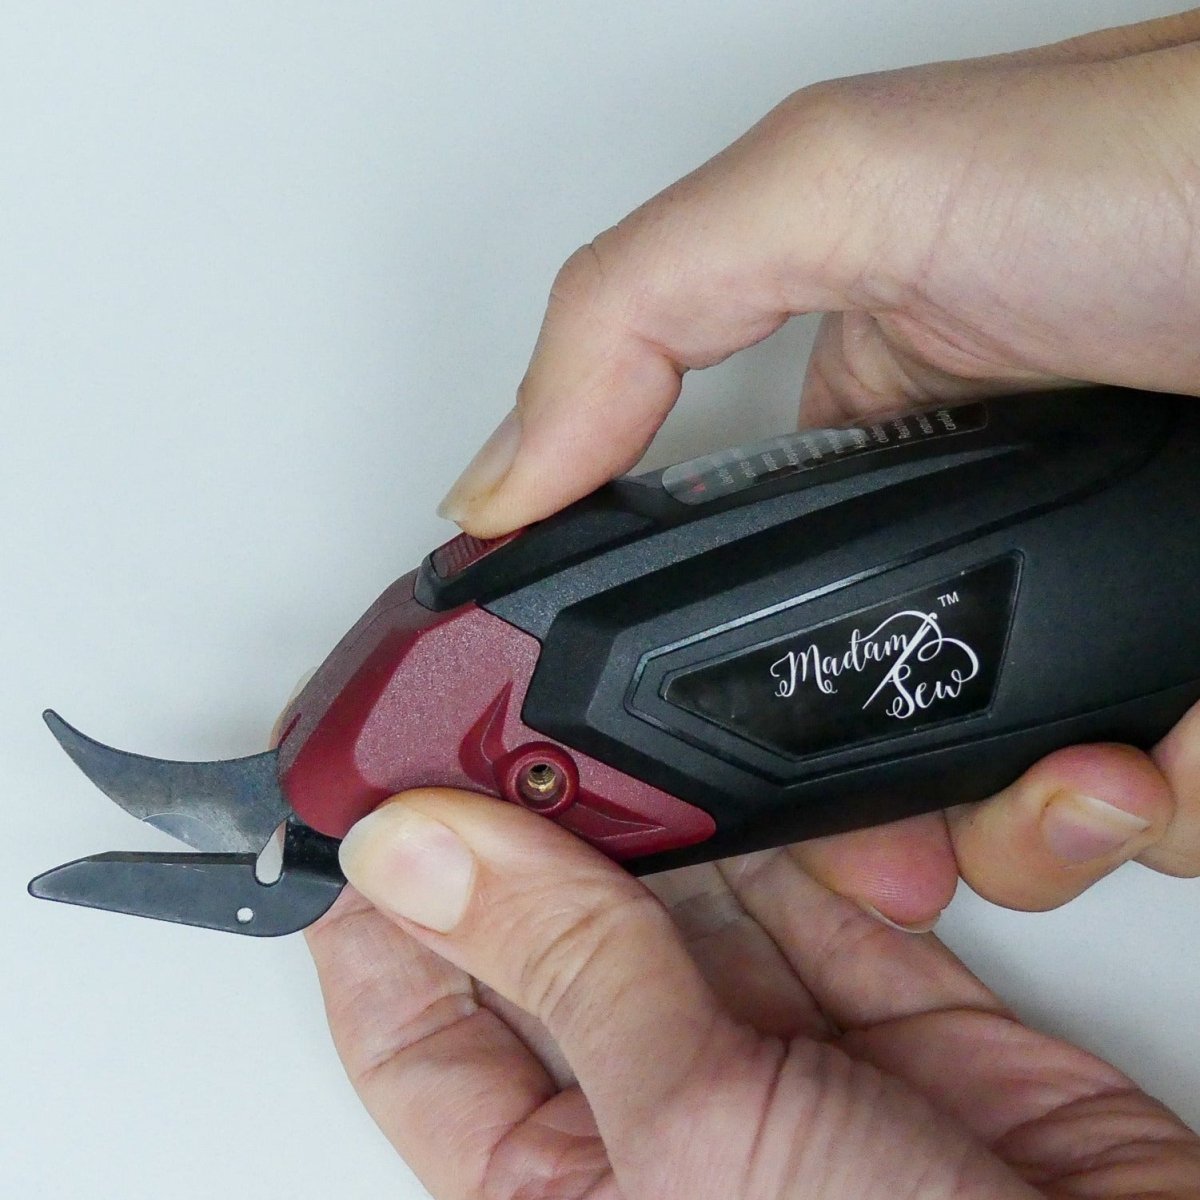 Pulling on the head of the electric fabric scissors to remove the head and replace